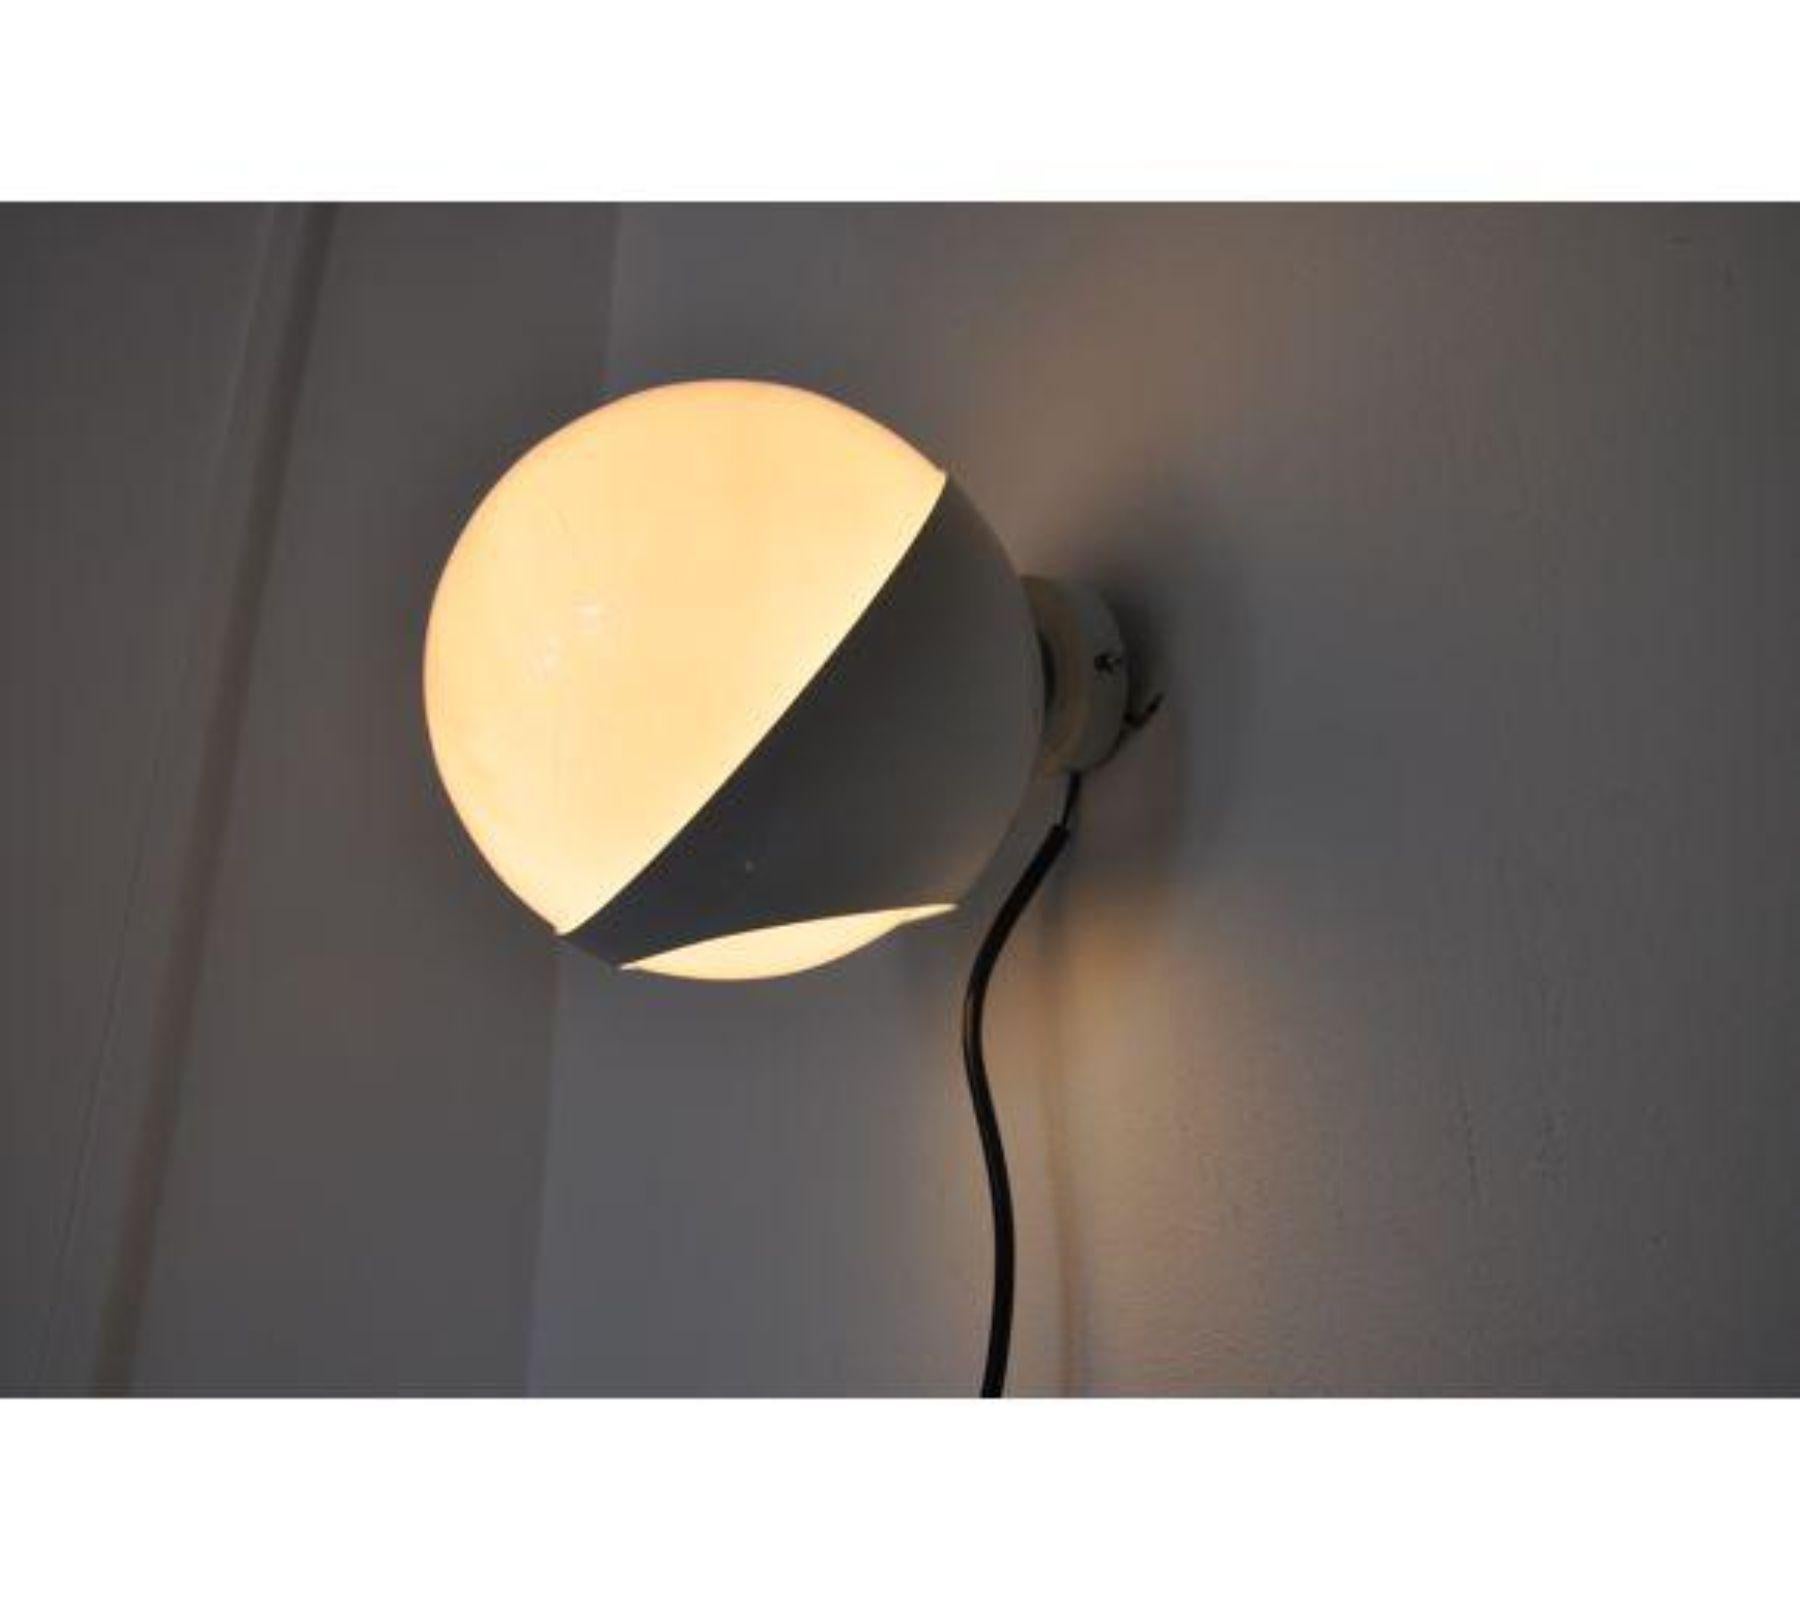 Stunning white Opaline wall light designed and produced in Italy crica 1970. A unique piece of design that will be great a highlight to your interior project. Object in mint conditions. Electricity verified by our team. Shipping under best